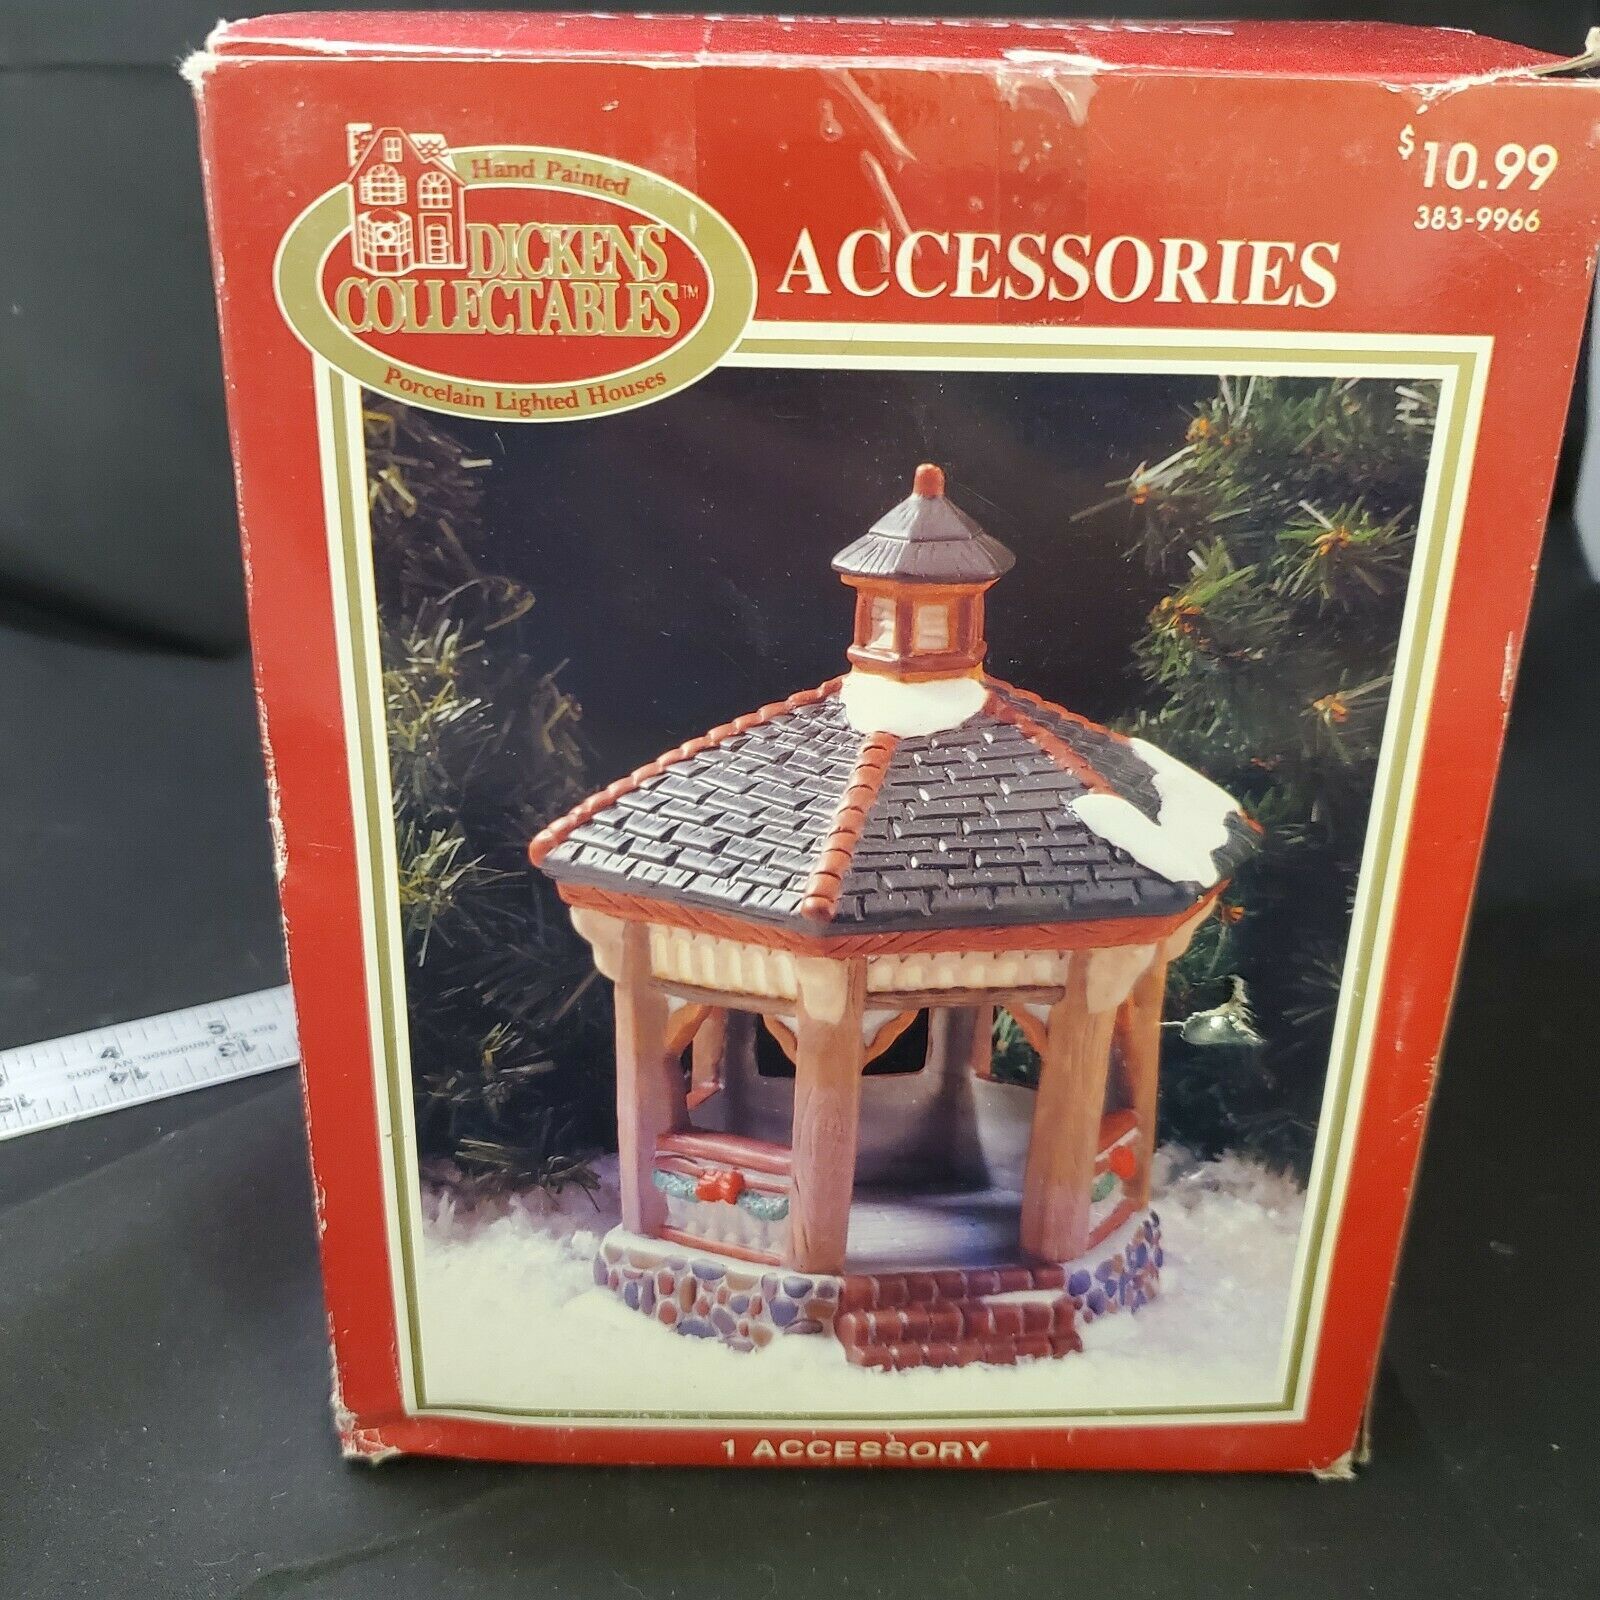 Primary image for Dickens Collectables Accessories Gazebo in original box Christmas Village 1998